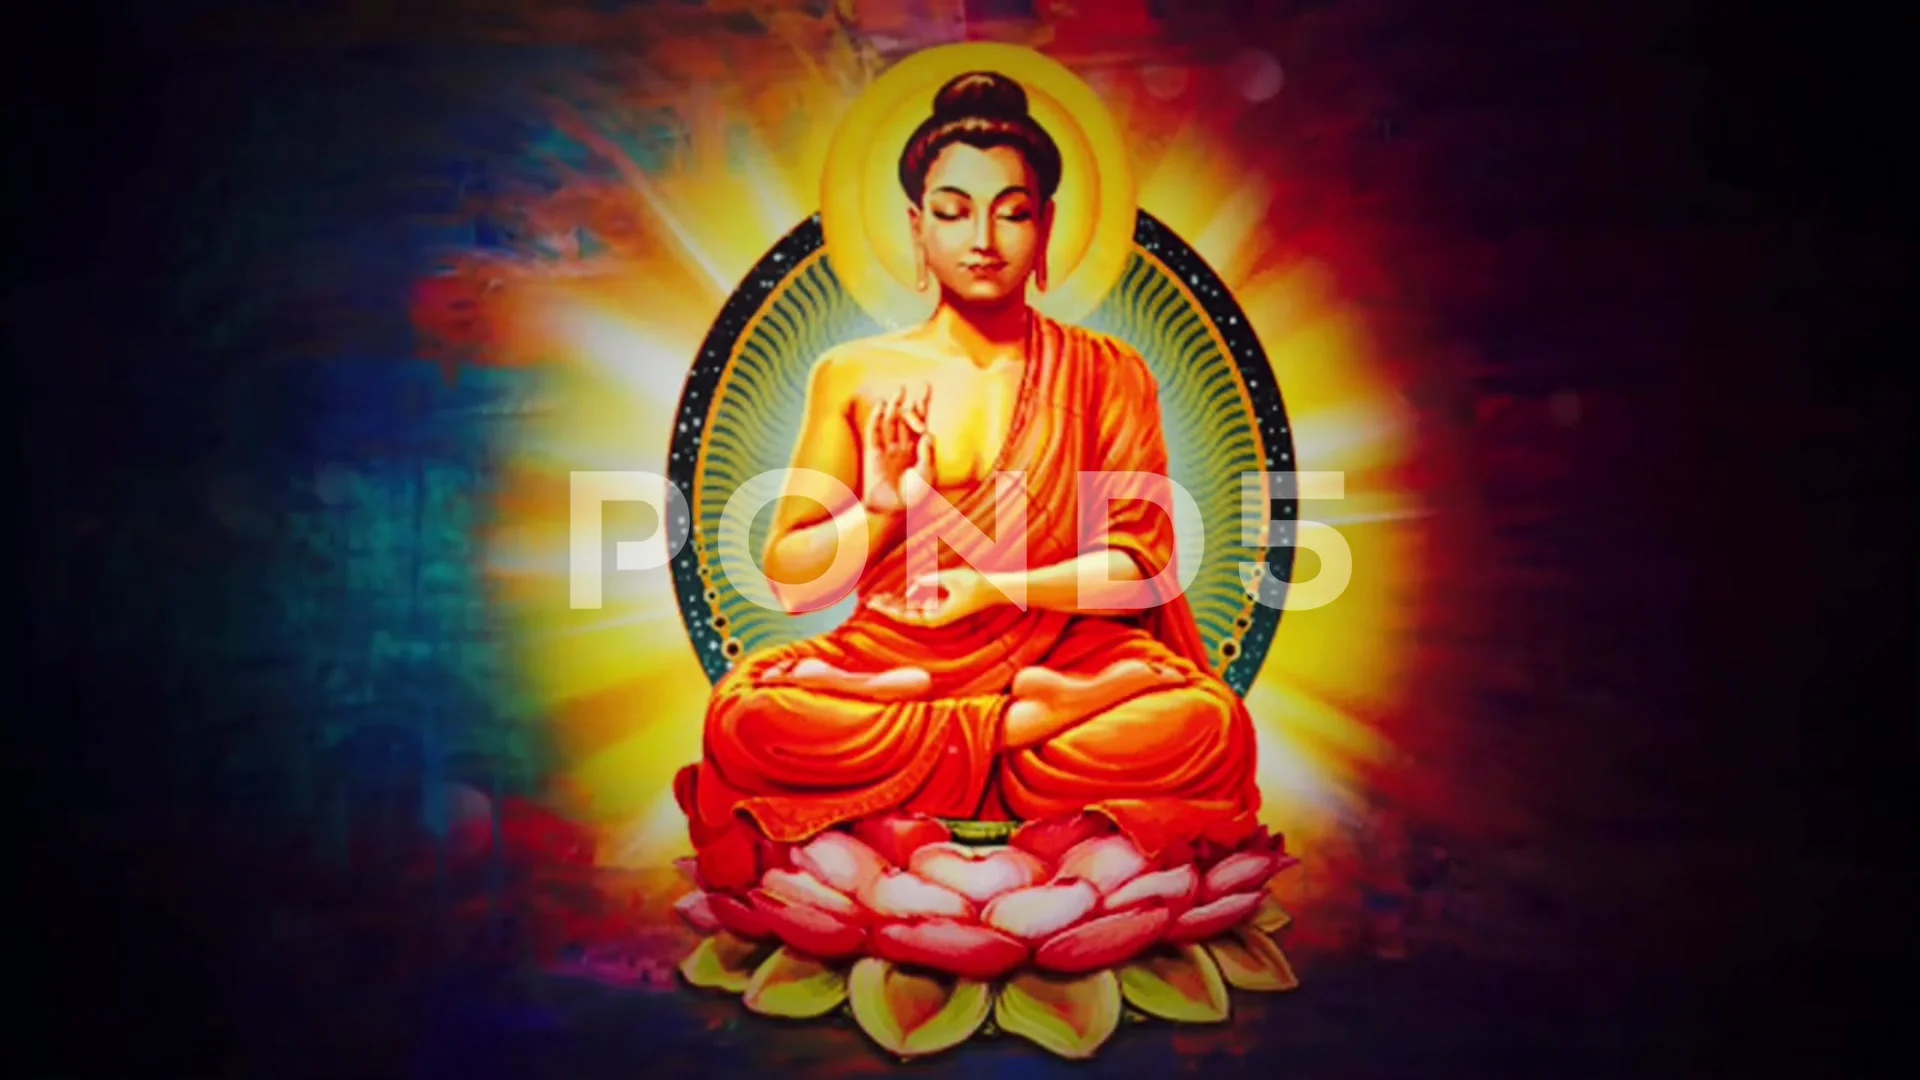 Art Posters Wallpaper Buddha Art And Monk Bedroom Decoration Paintings  Canvas Wall Art Room Decoration Aesthetics Wall Paintings Gifts  16x24inch(40x60cm) : Amazon.ca: Home